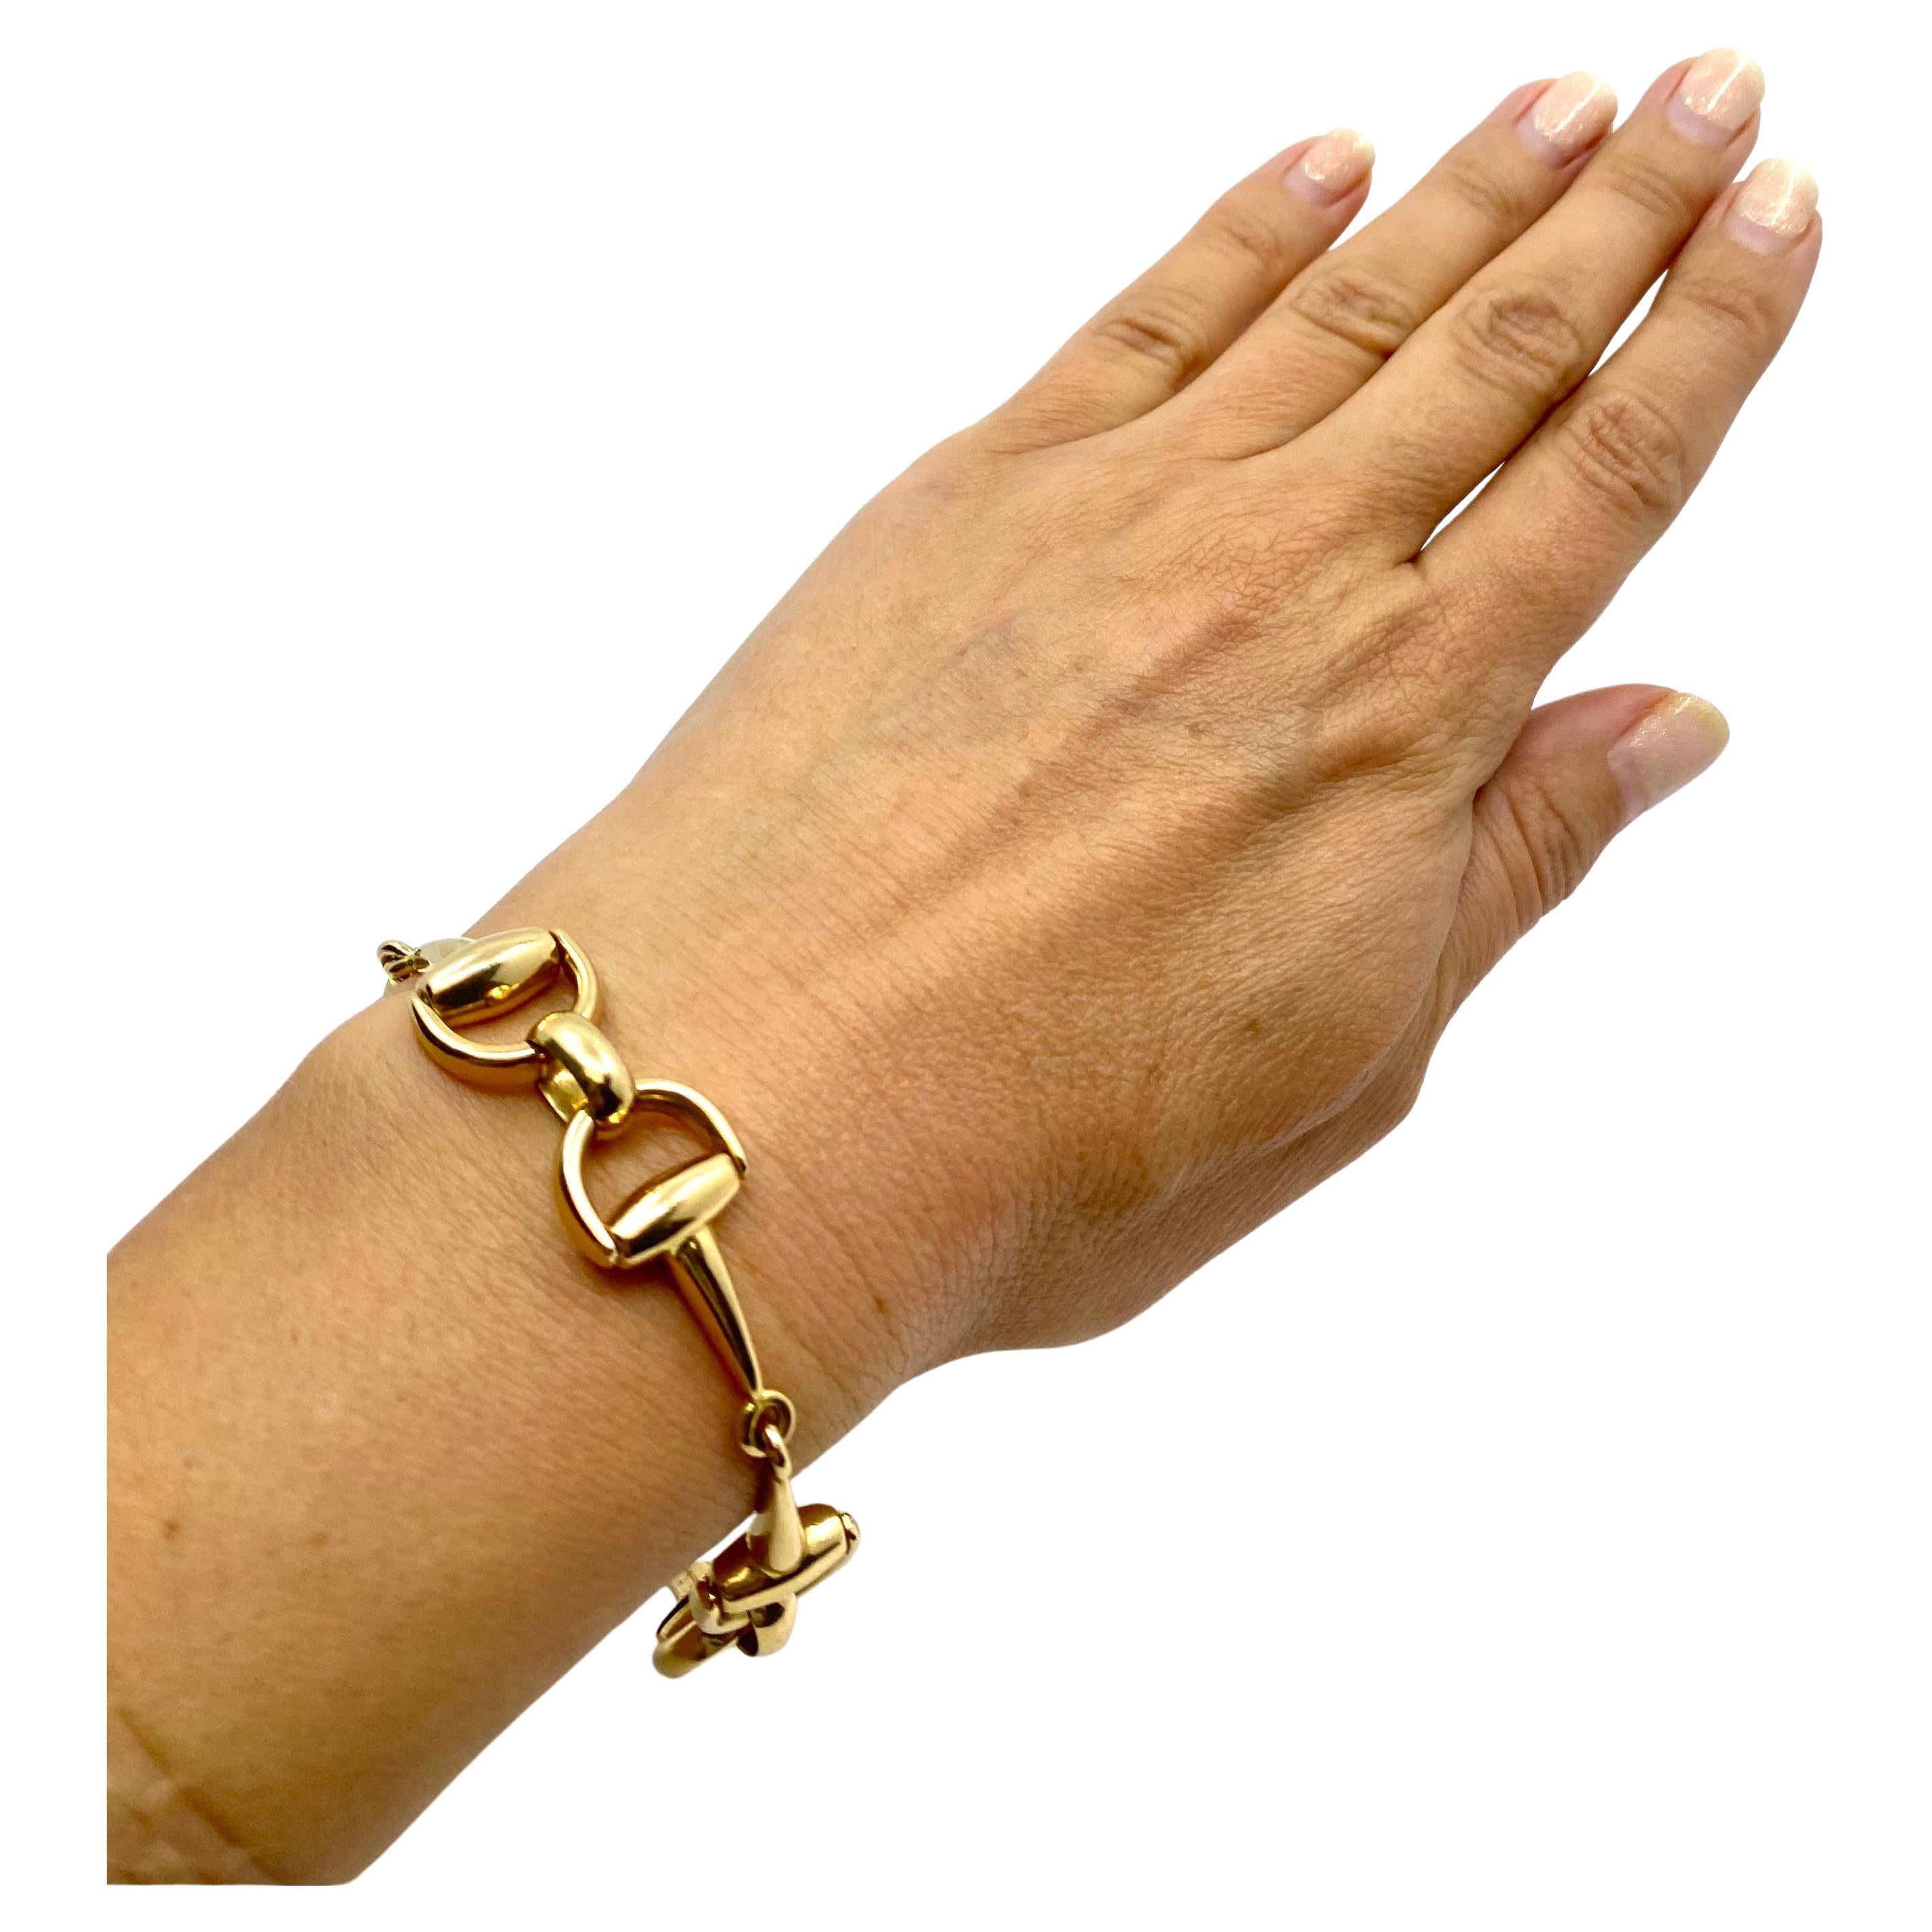 
CIRCA: 1990’s
MATERIALS: 18k Yellow Gold
WEIGHT: 32.2 grams
MEASUREMENTS: 7 1/2” x 1/2”
HALLMARKS:  750

ITEM DETAILS:
A beautiful vintage bracelet with equestrian motif, made in 18k gold. The links of the bracelet are designed as pair of stirrups.